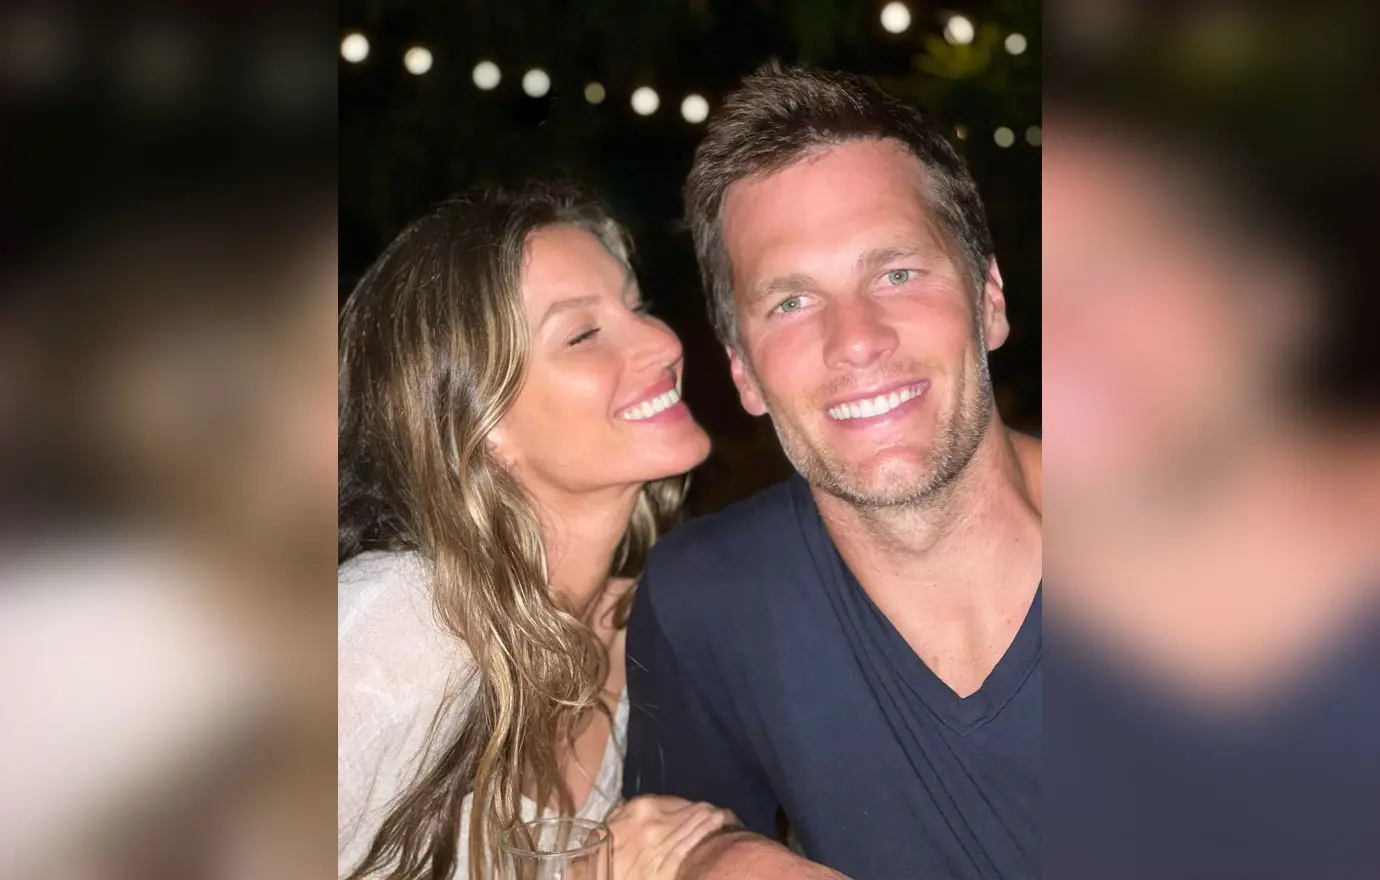 Tom Brady and his ex-wife are falling in love all over again, getting ready to say "I do" for the second time.